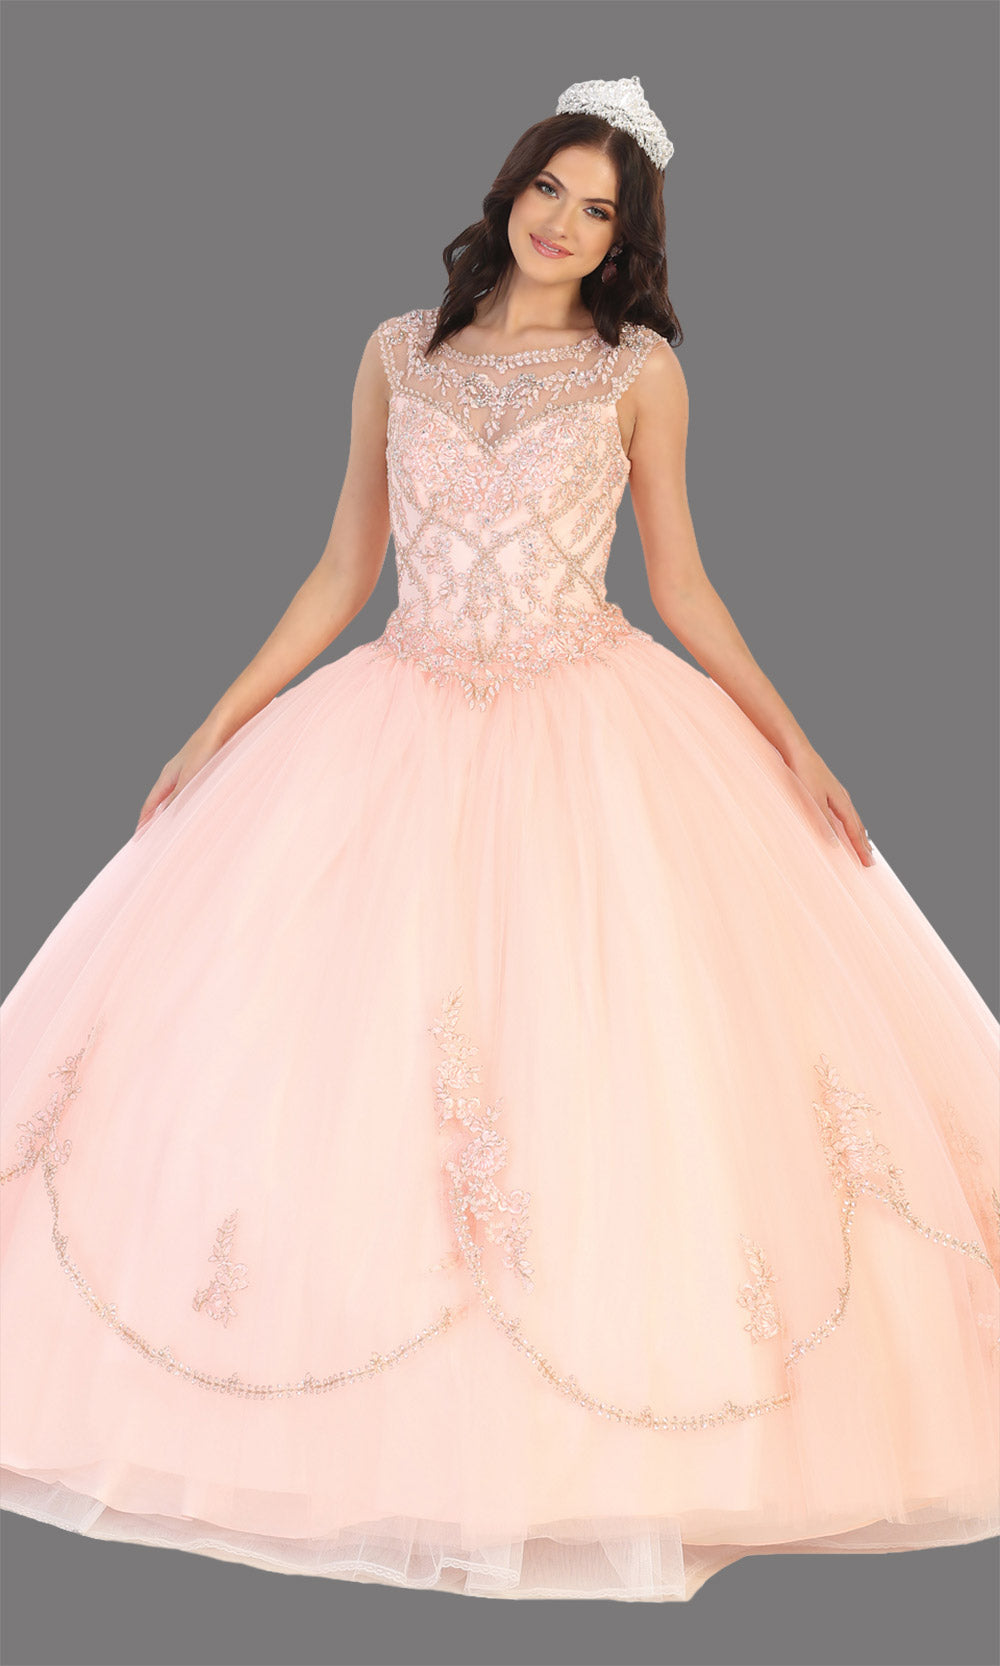 Mayqueen LK130 blush pink quinceanera high neck ball gown w/gold sequin detail. Light pink ball gown is perfect for engagement dress, wedding reception, indowestern party gown, sweet 16, debut, sweet 15, sweet 18. Plus sizes available for ballgowns.jpg